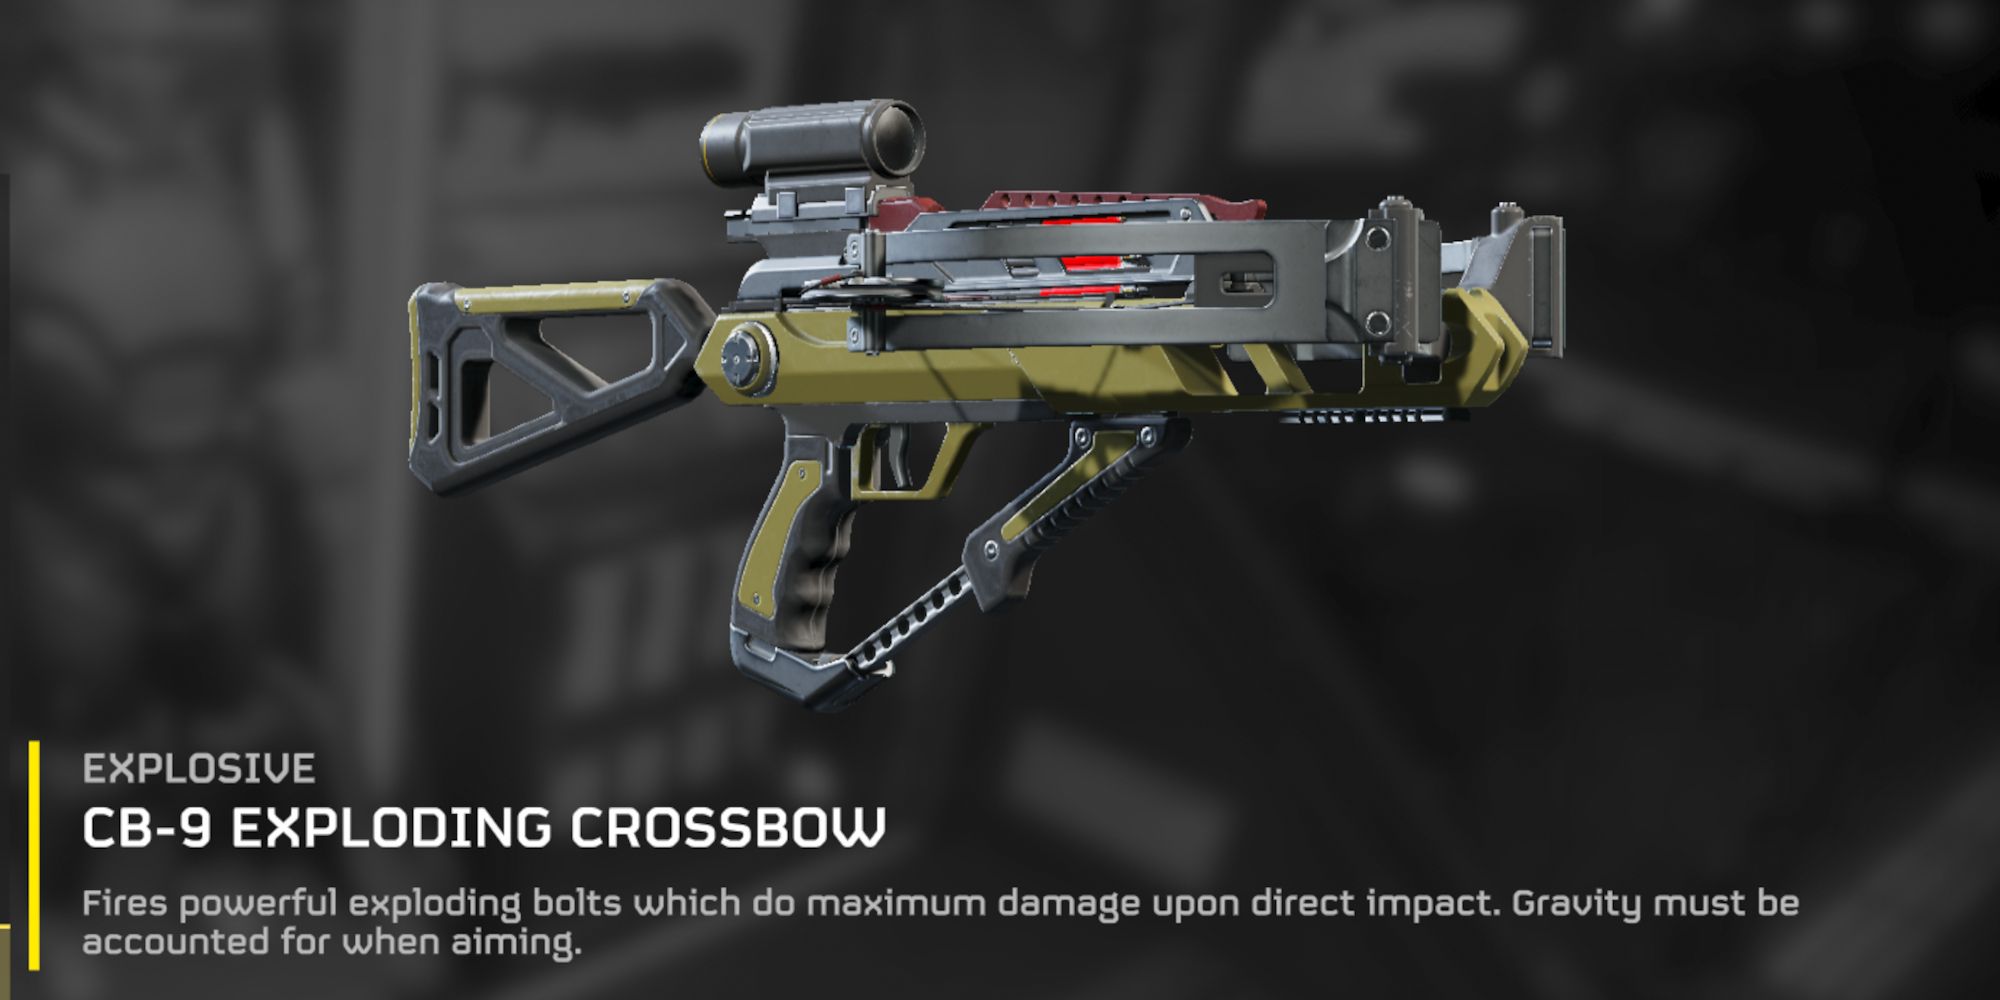 CB-9 Esploding Crossbow in inventory in Helldivers 2